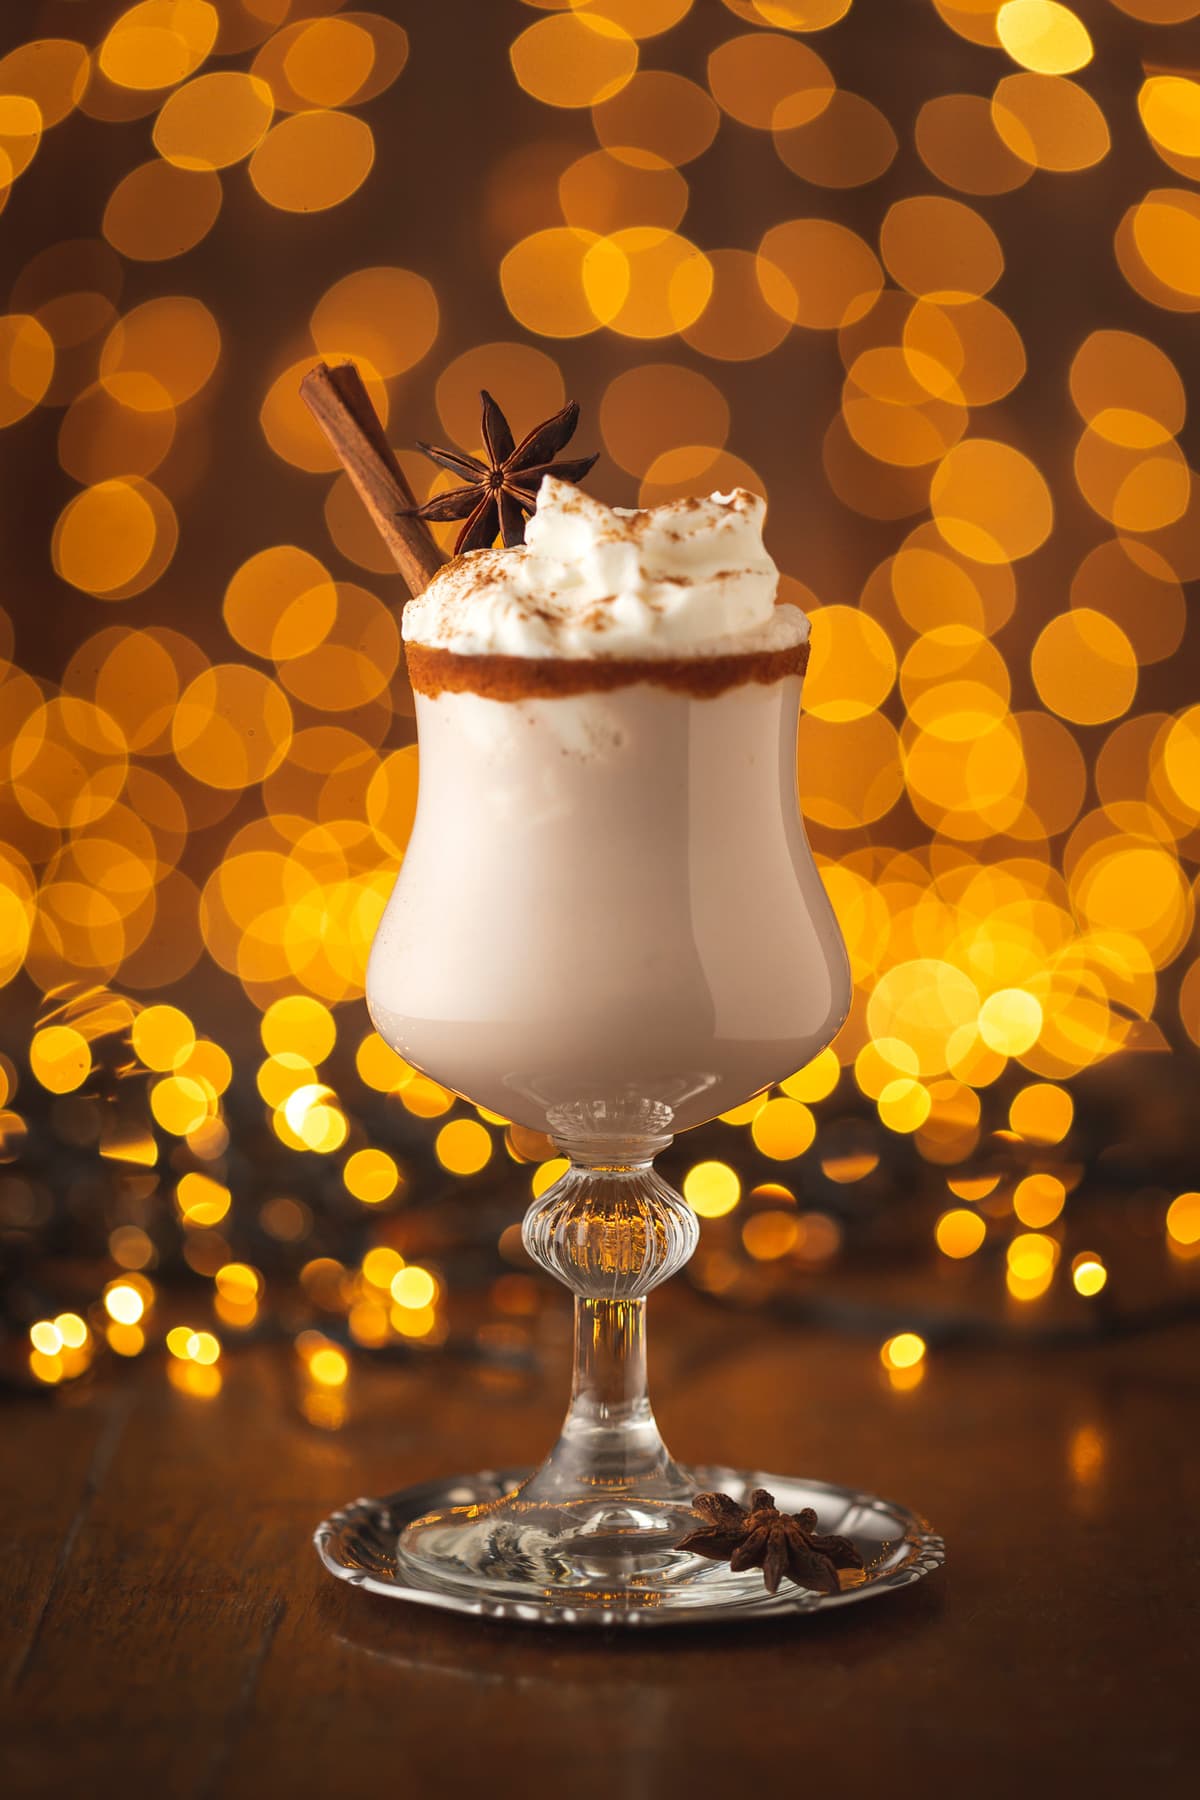 Delicious creamy homemade eggnog served in glasses with cinnamon rim decorated with anise star and cinnamon sticks with Christmas lights in the background